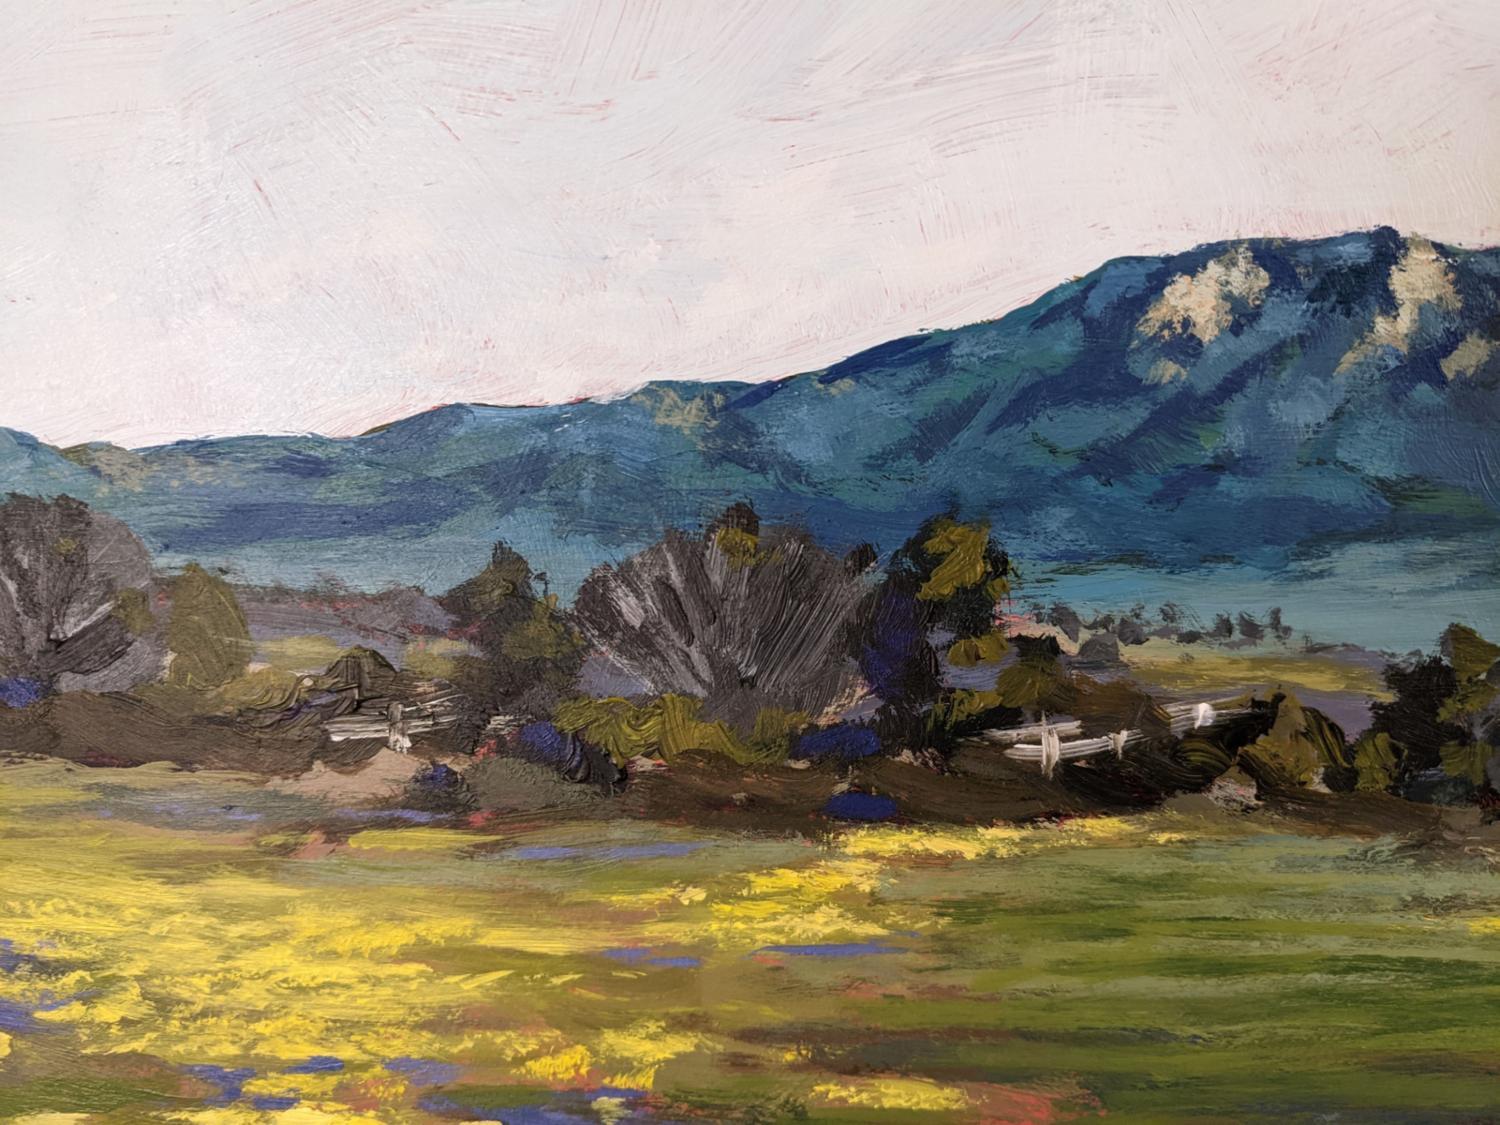 <p>Artist Comments<br />Artist Samuel Pretorius demonstrates an impressionist landscape of the scenic mountains of California. Bright yellow spring flowers carpet the ground, interspersed with splashes of purple. The majestic Cahuilla mountain